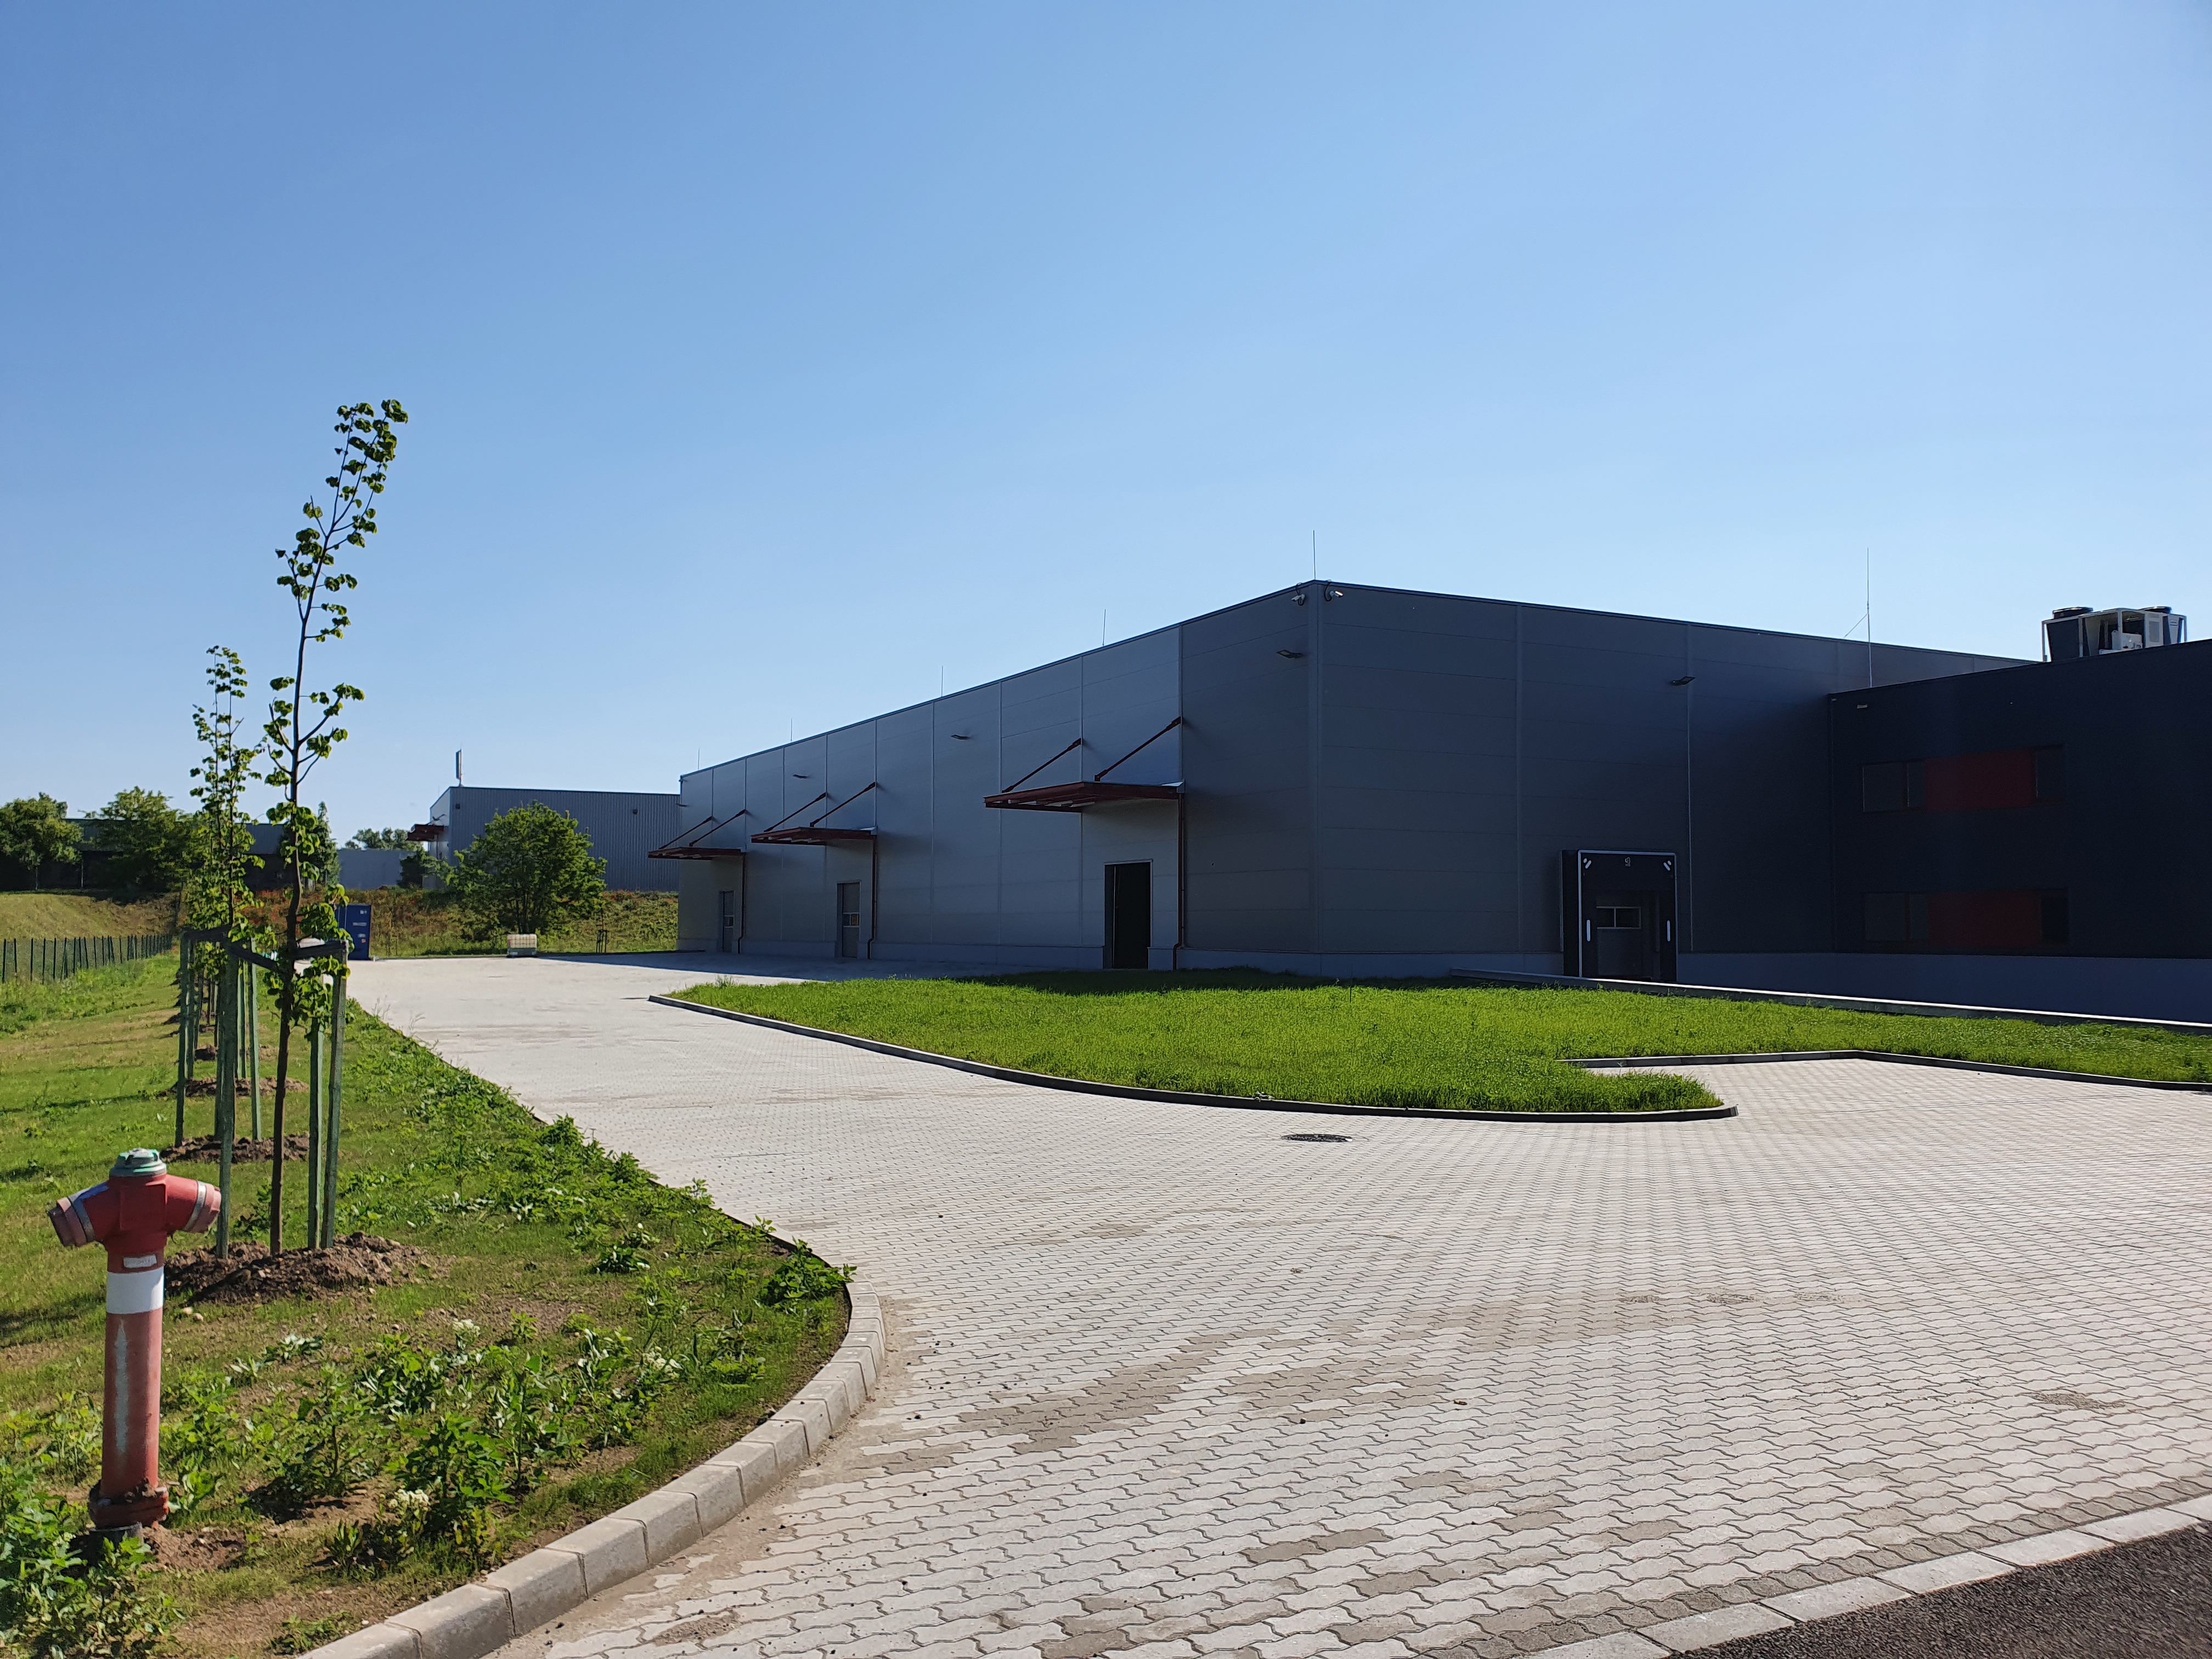 East Gate Business Park's Hall D3 at 100% occupancy